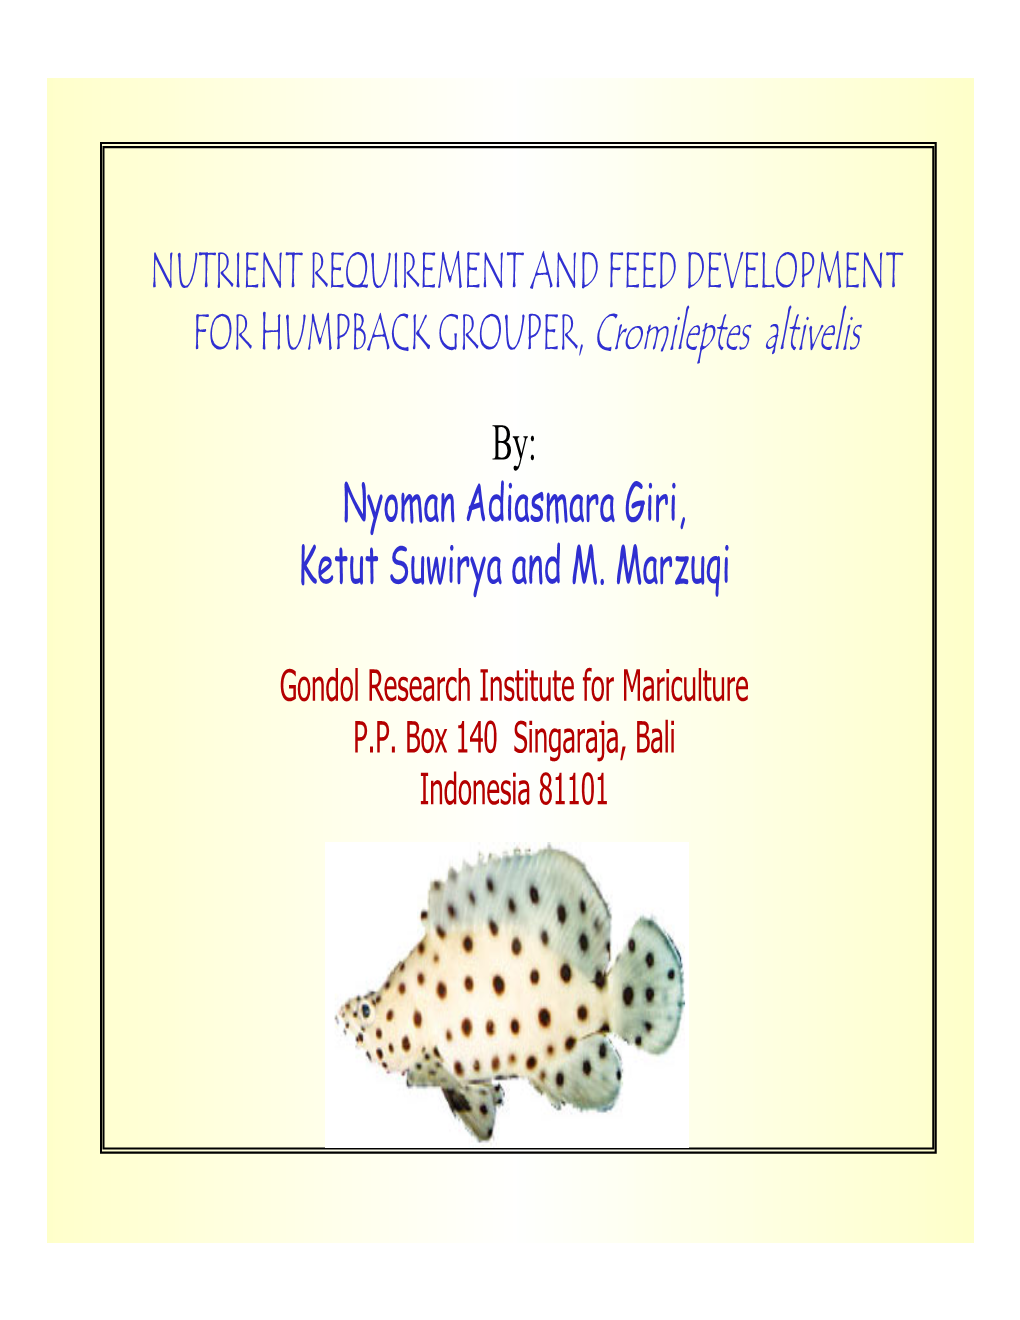 NUTRIENT REQUIREMENT and FEED DEVELOPMENT for HUMPBACK GROUPER, Cromileptes Altivelis